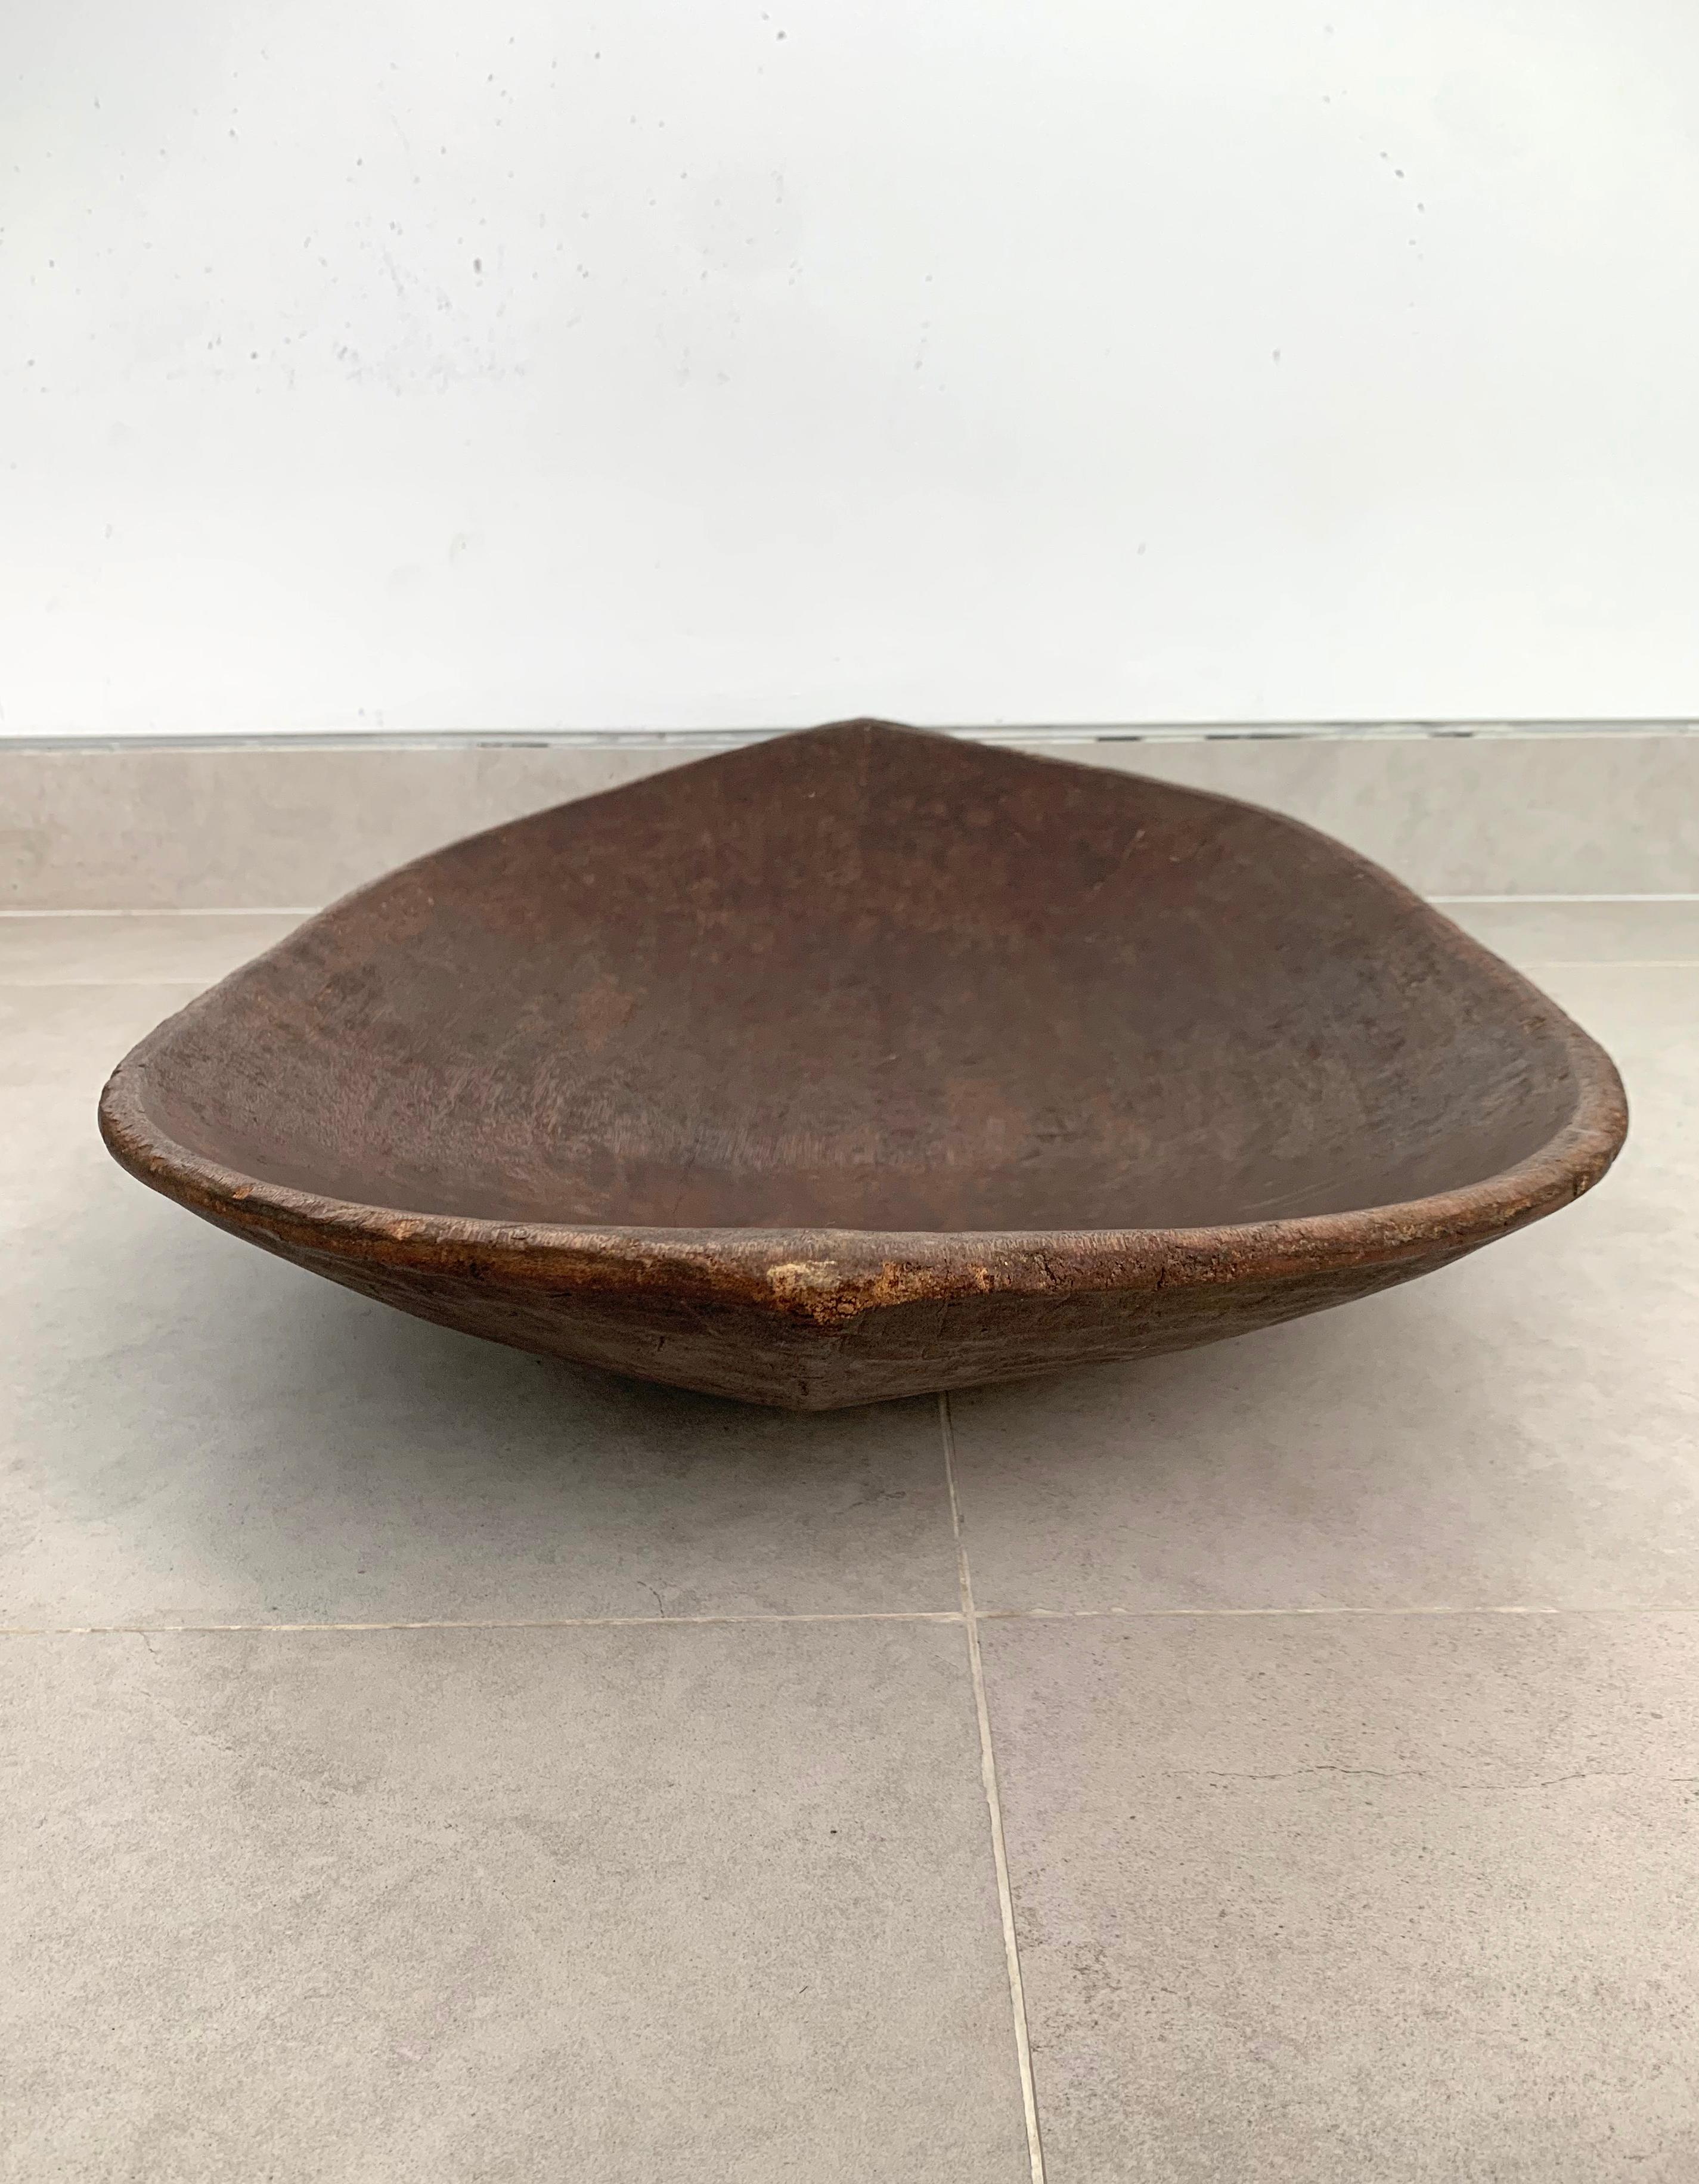 Other Hand-Carved Wooden Tray / Bowl Mentawai Tribe of Indonesia, Mid-20th Century 